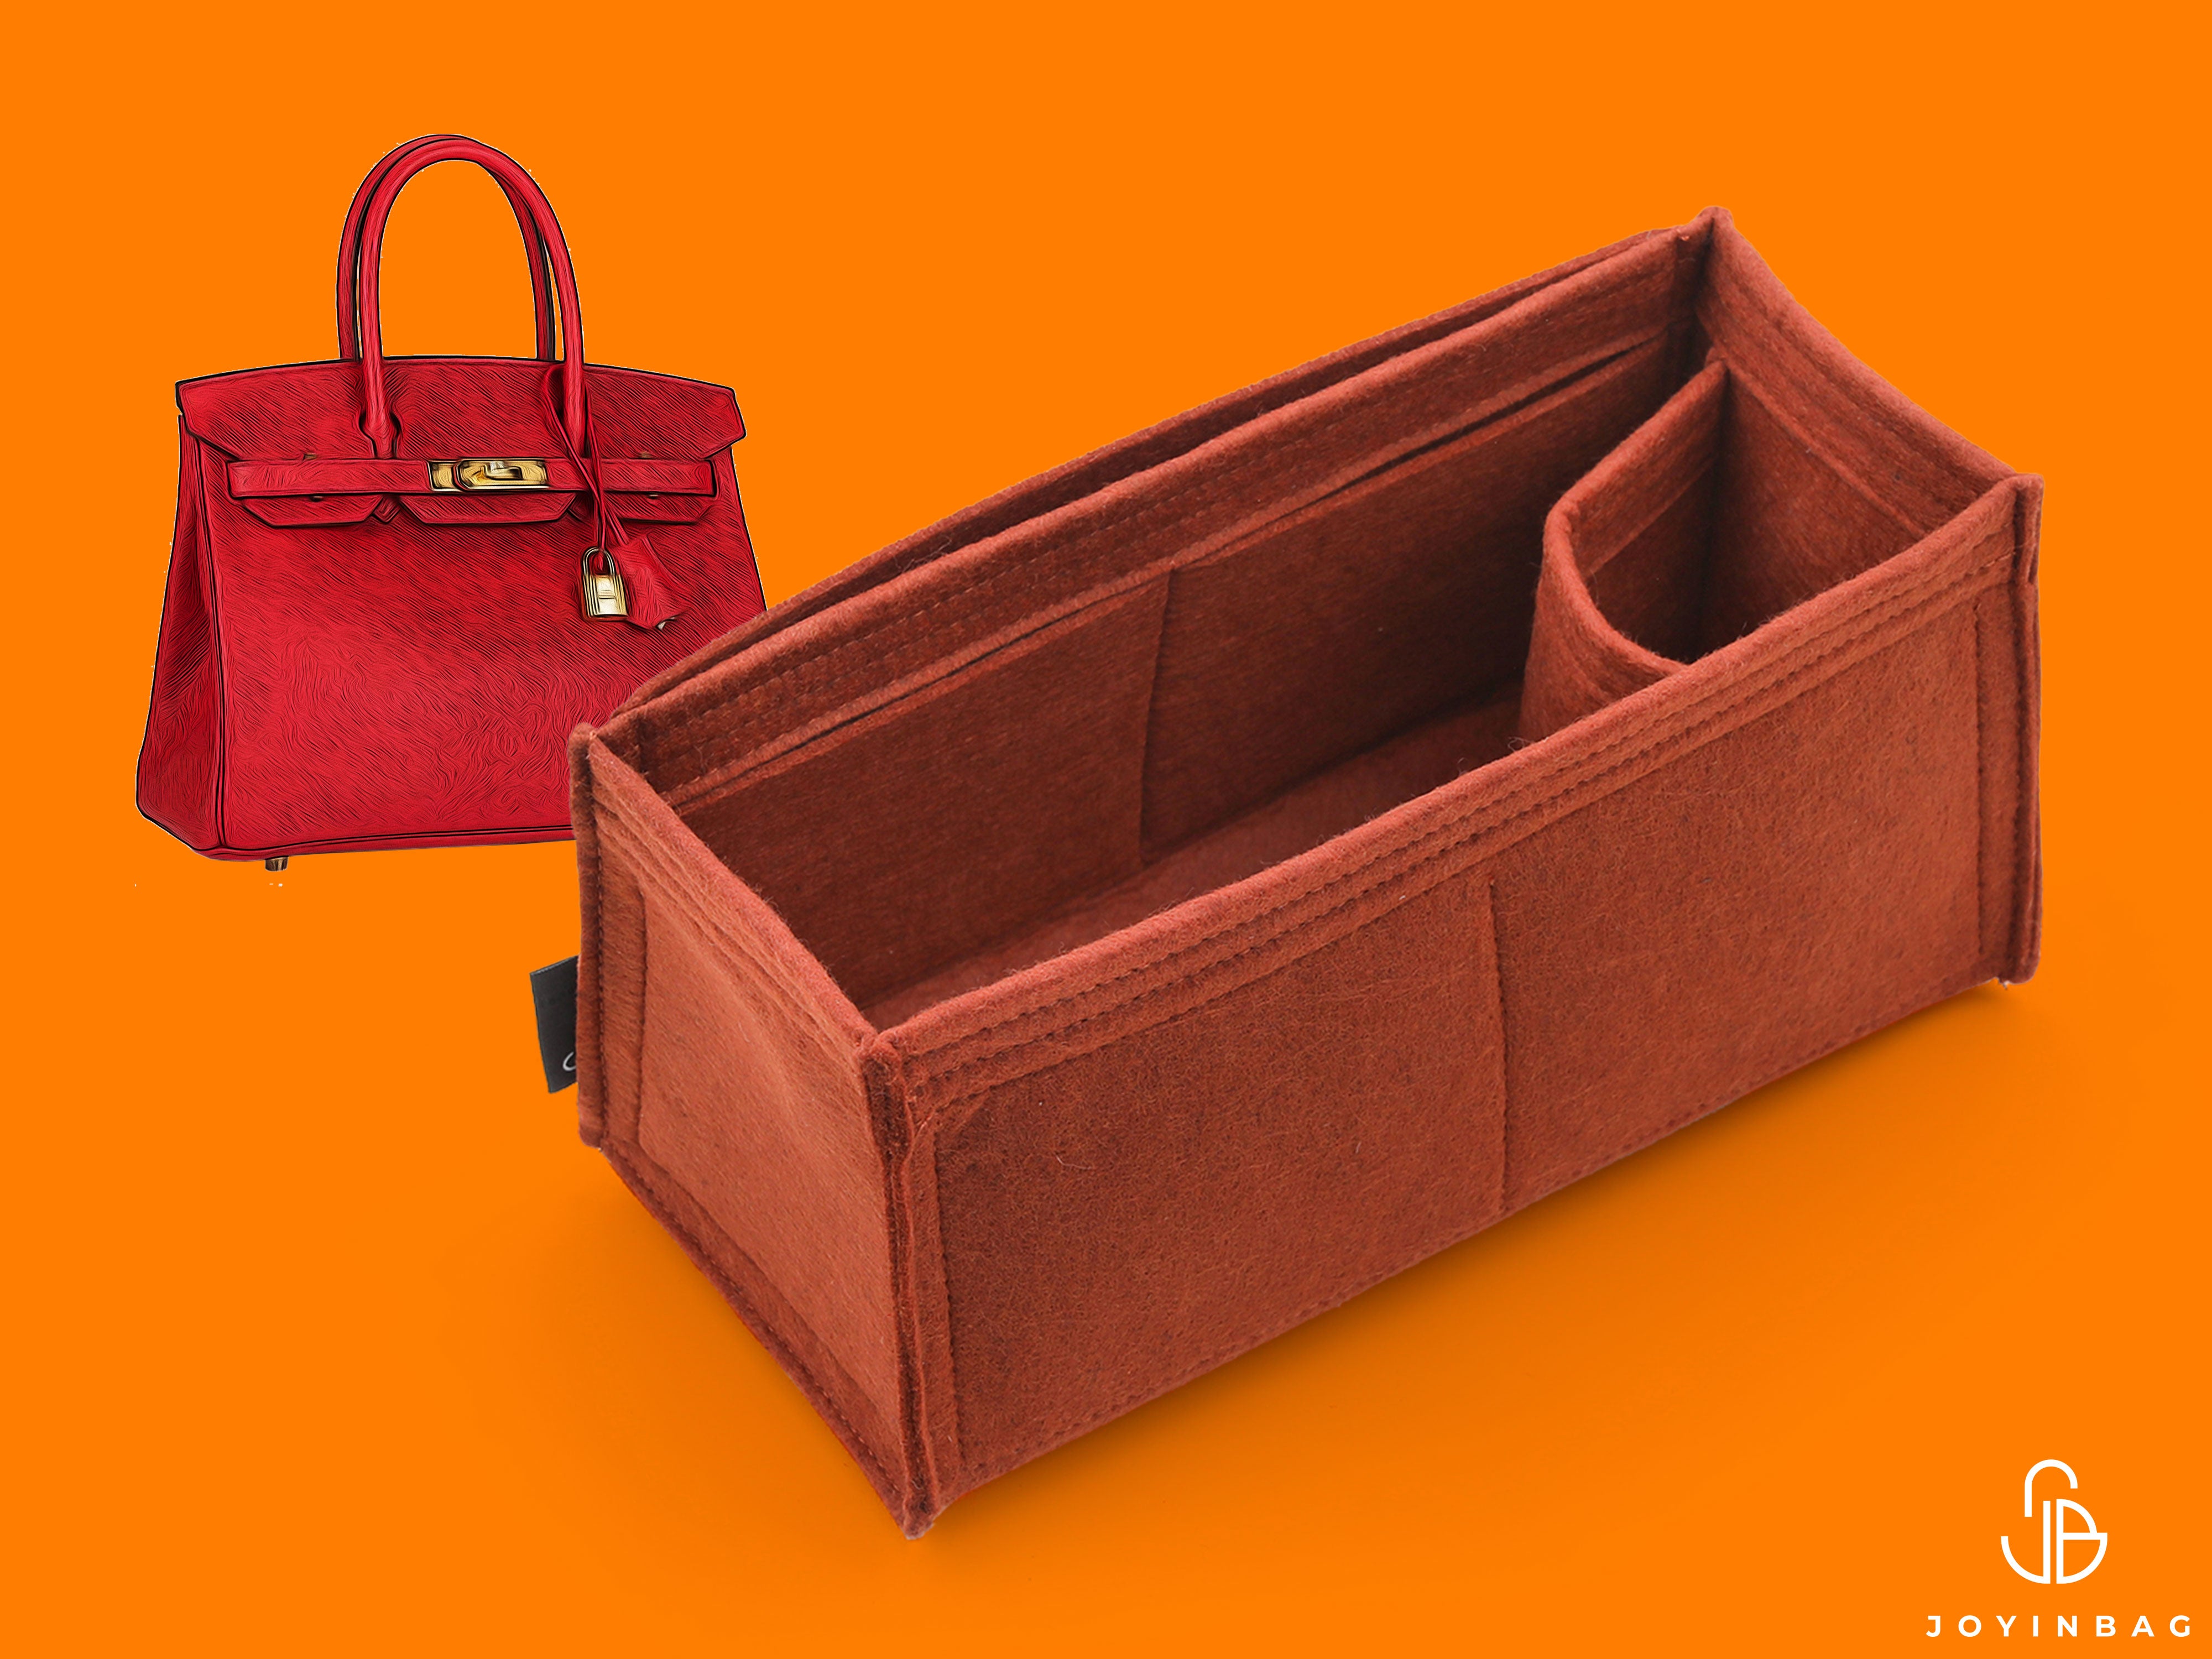 Hermes Birkin Sizes. What Fits in the 25, 30 and 35? 